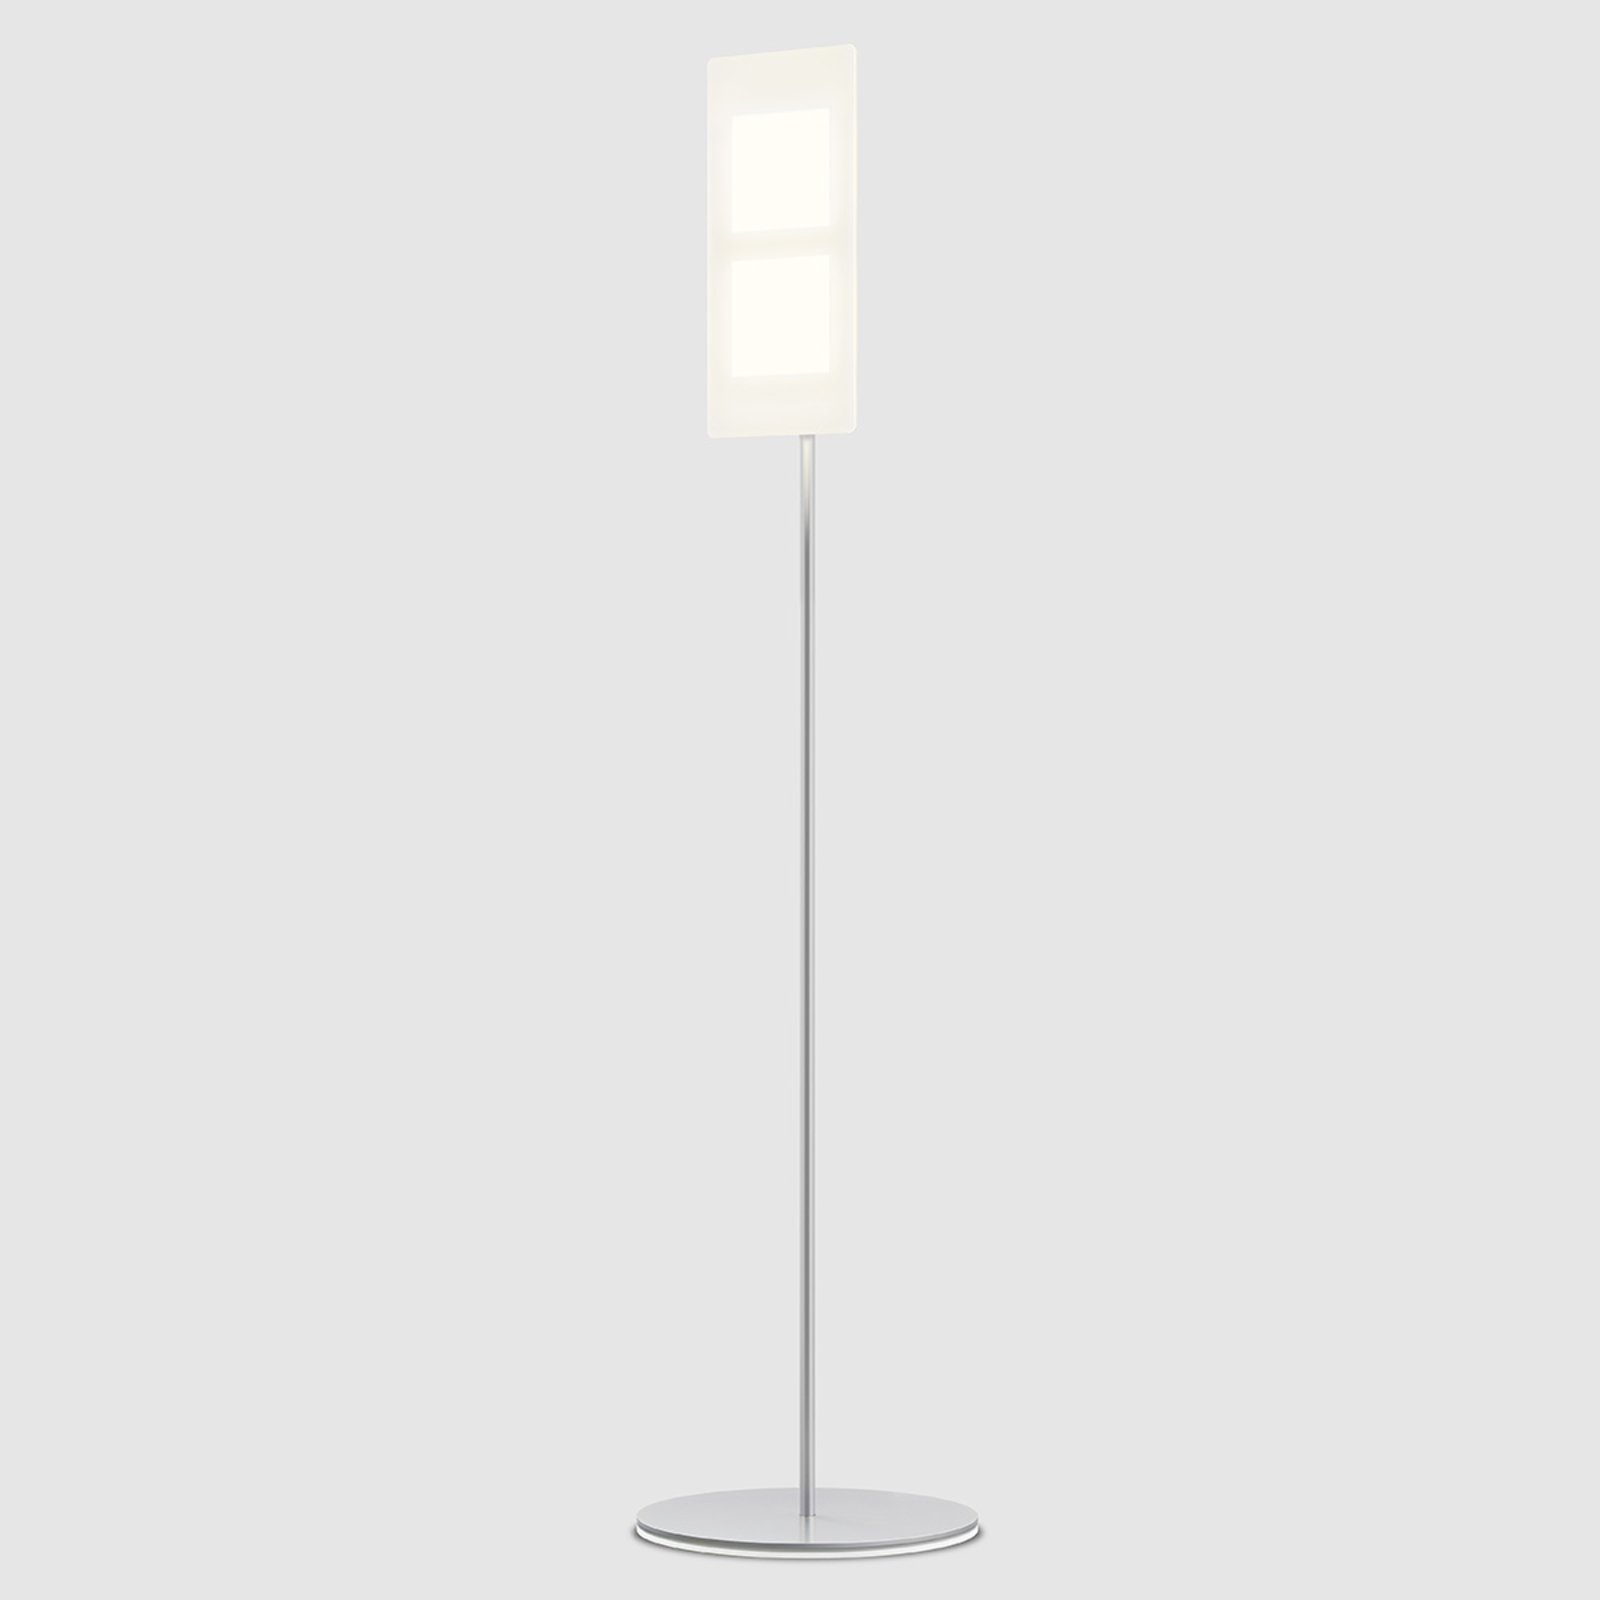 With OLEDs - floor lamp OMLED One f2 white